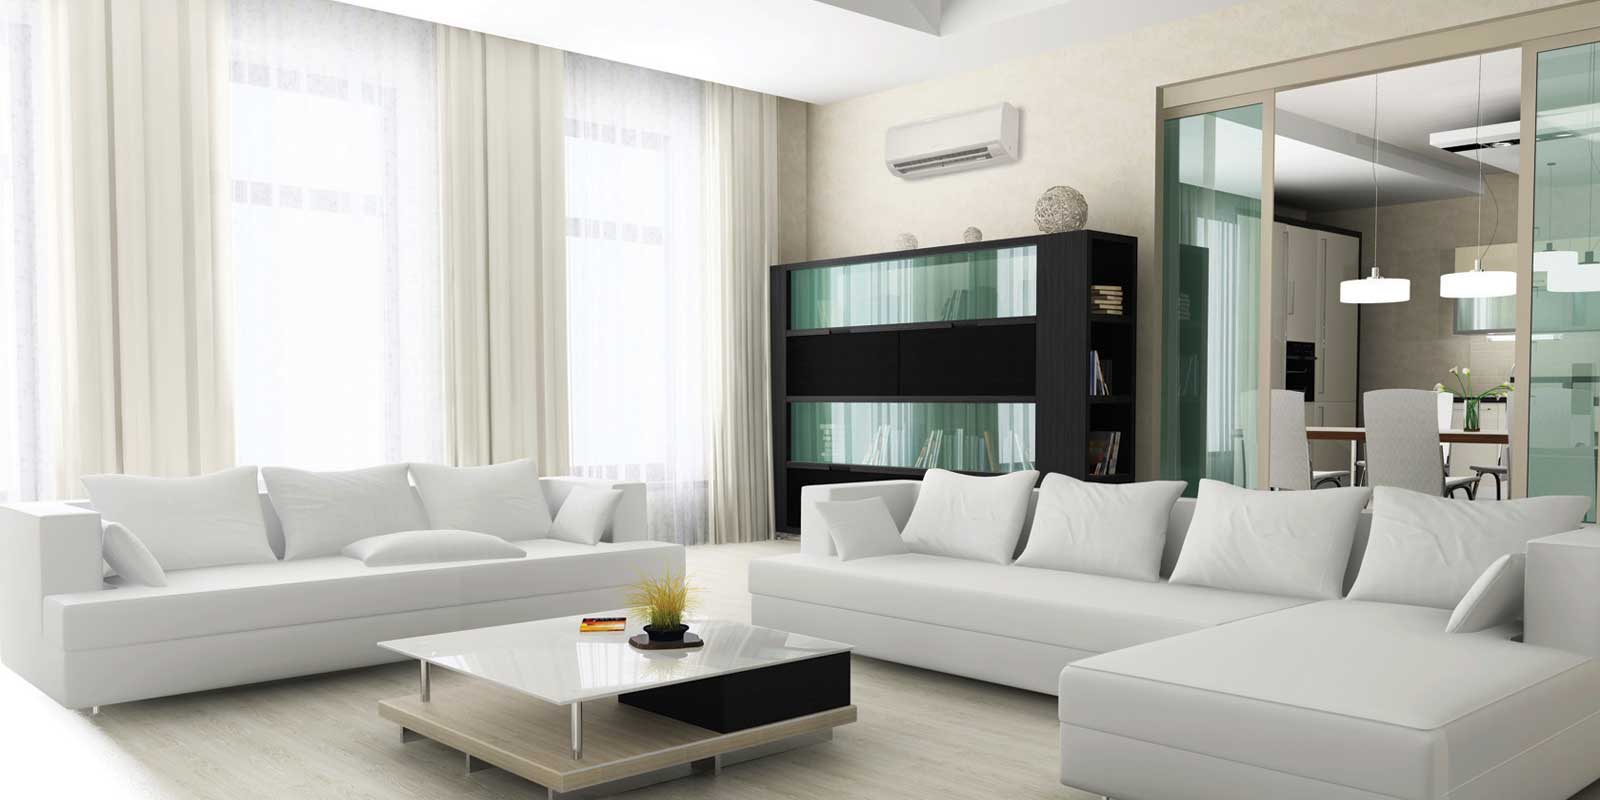 Living room with ductless system